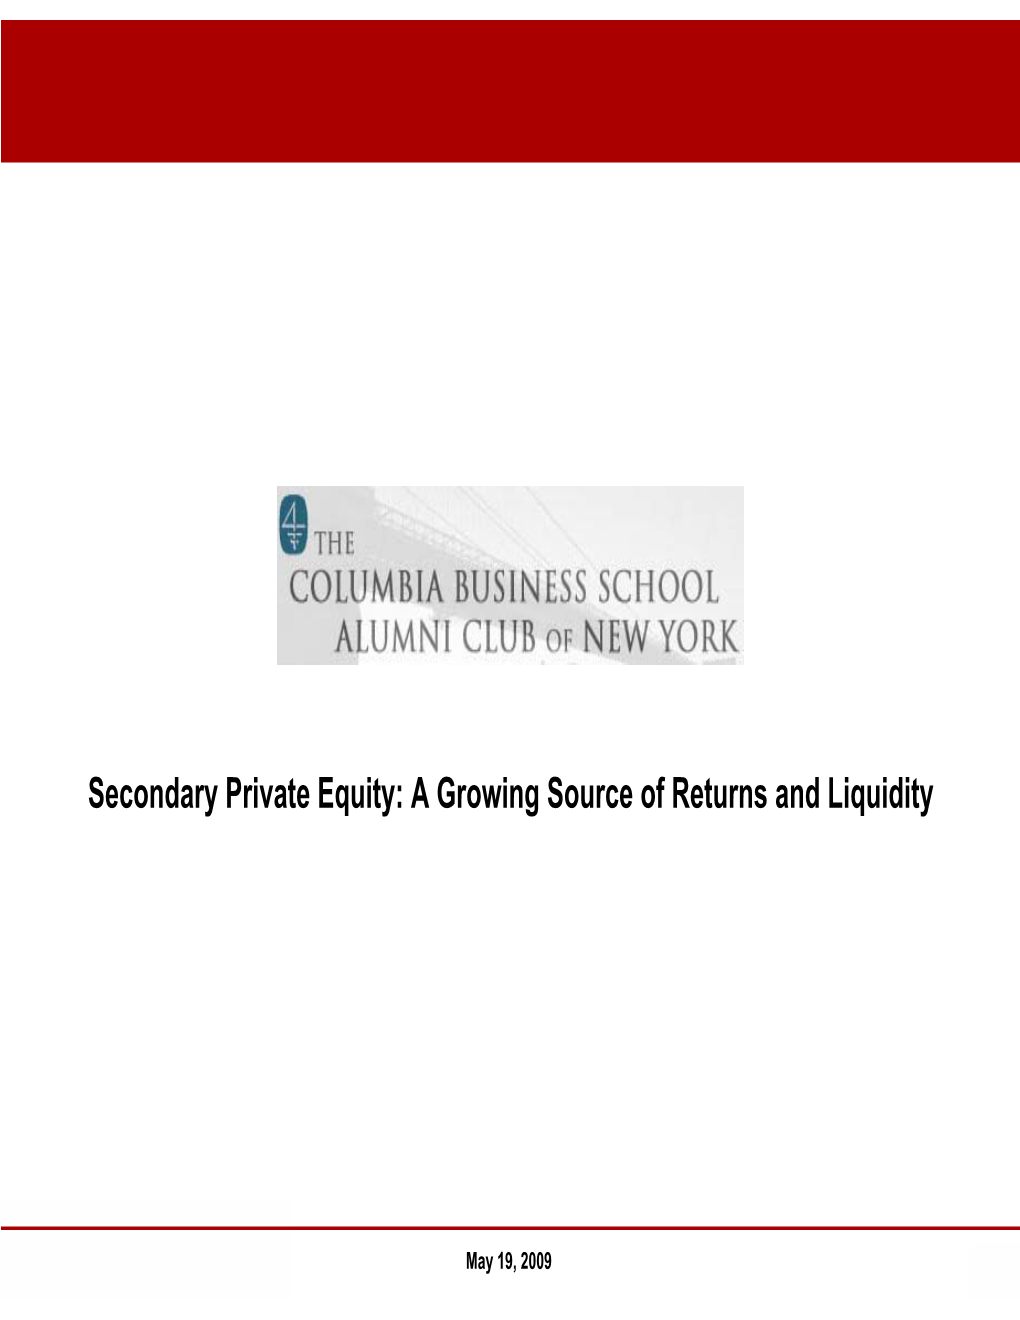 Secondary Private Equity: a Growing Source of Returns and Liquidity